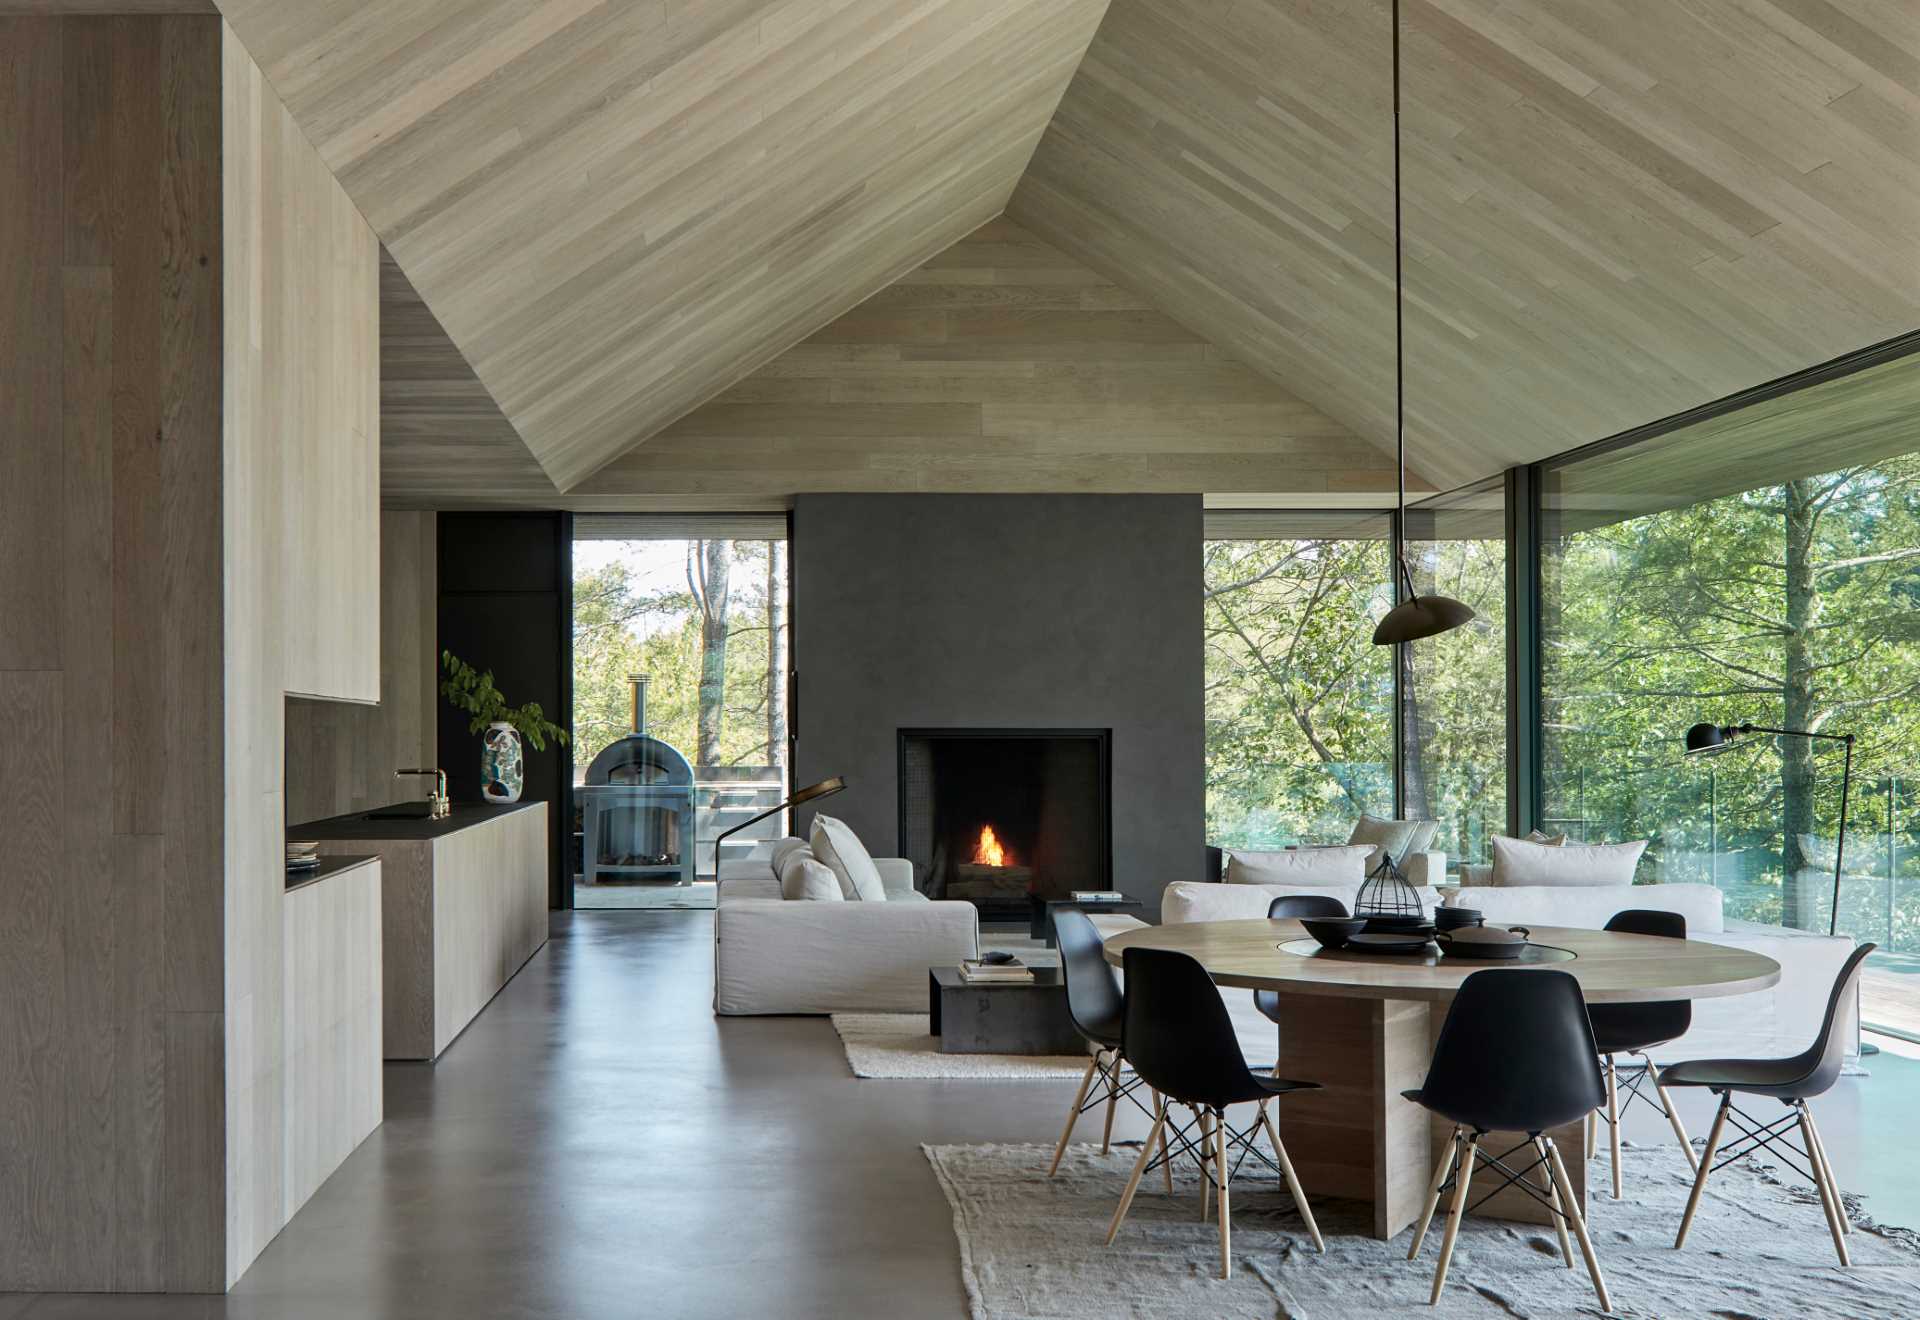 At the heart of this modern cottage is an open-concept living and dining area framed by a vaulted ceiling encased in hand-brushed European oak boards. 